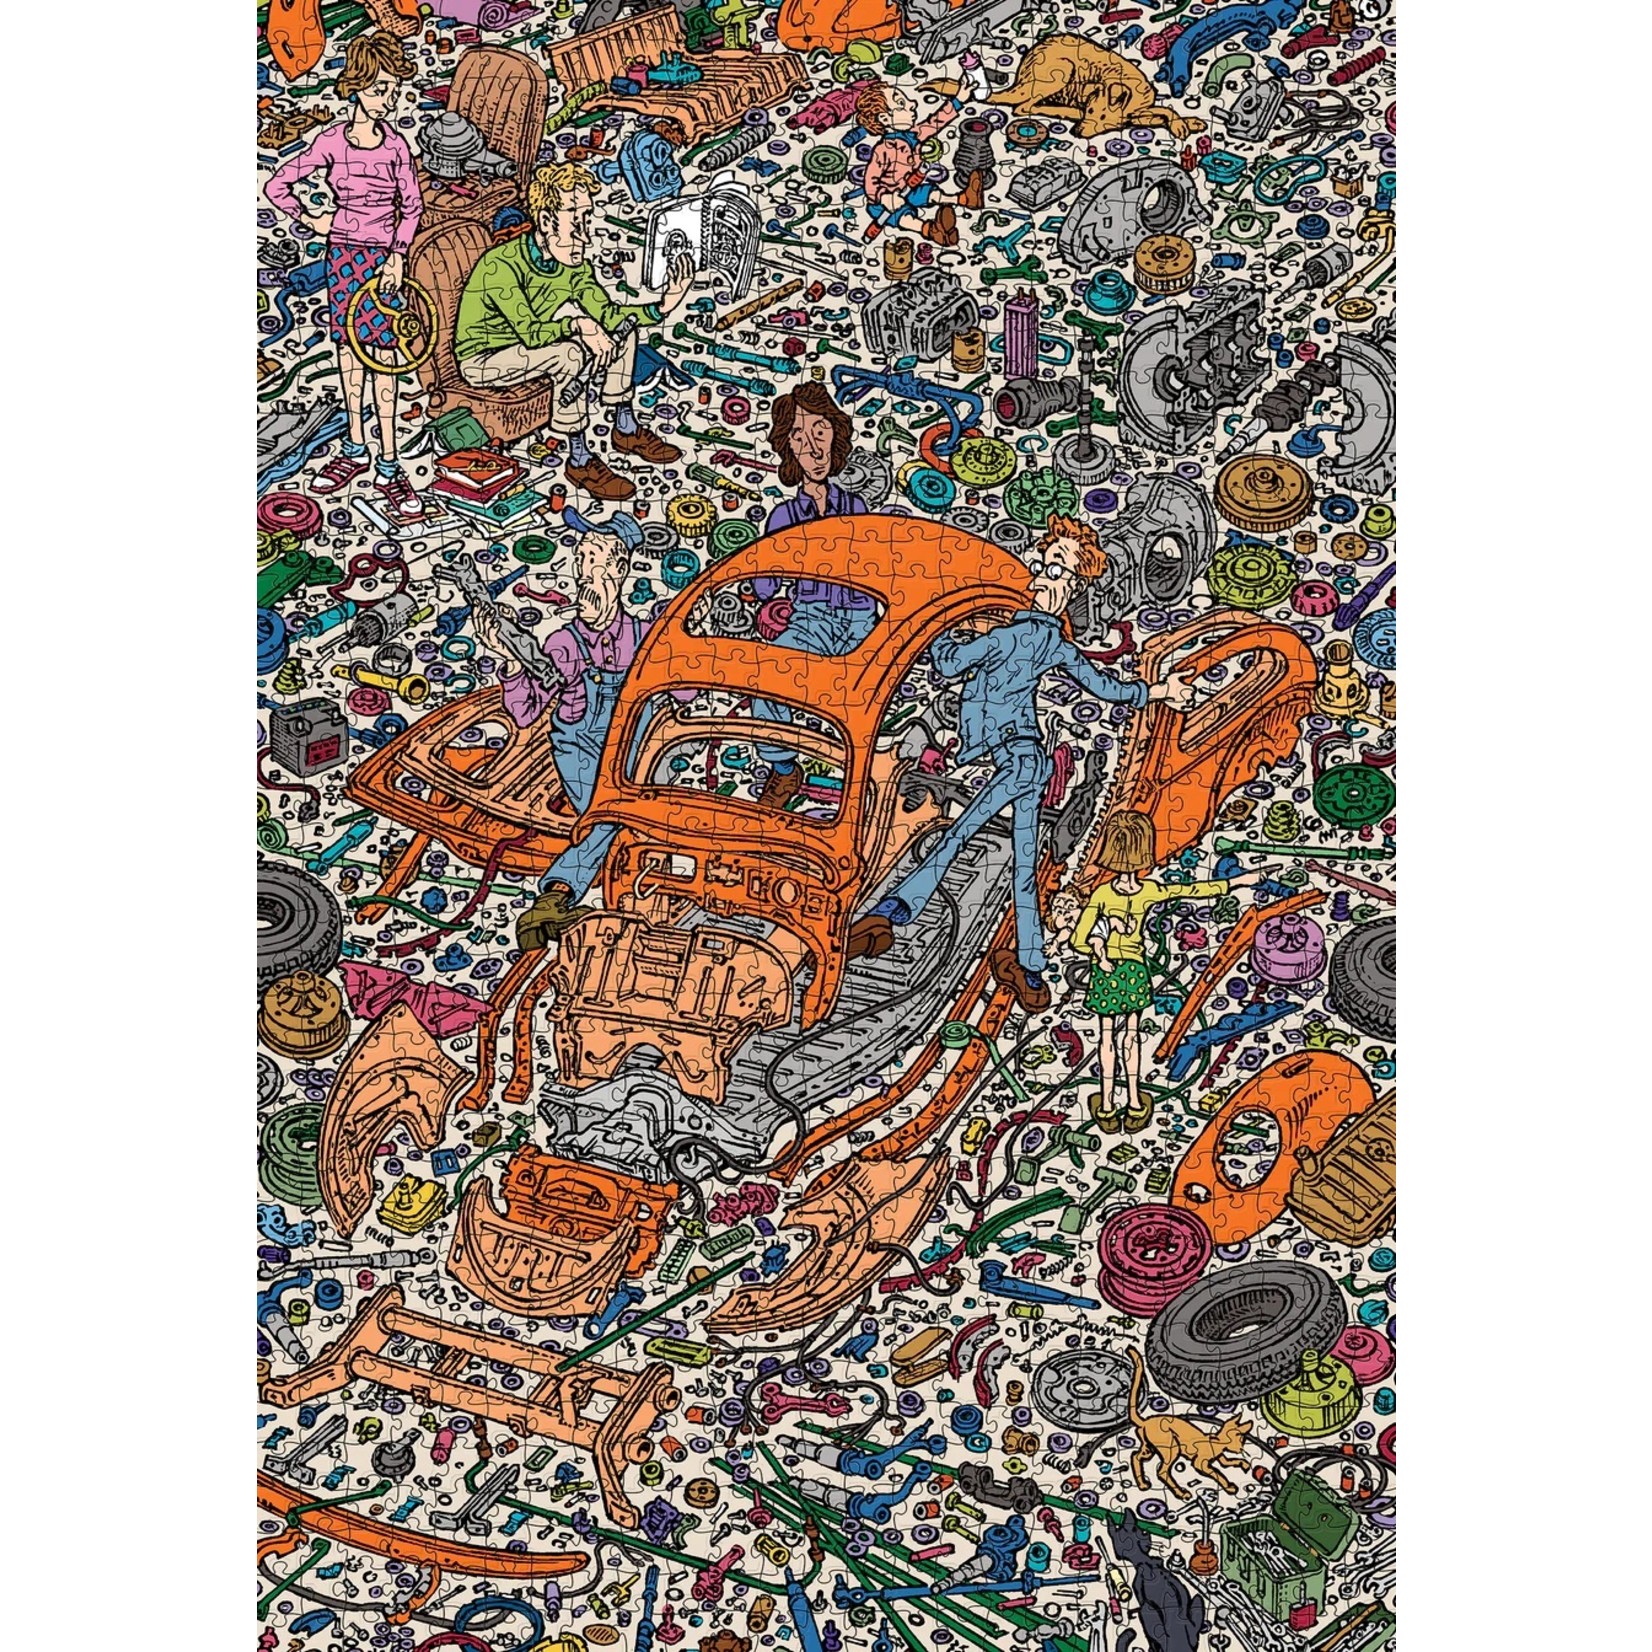 Peter Aschwanden: The Exploded Beetle 1000pc